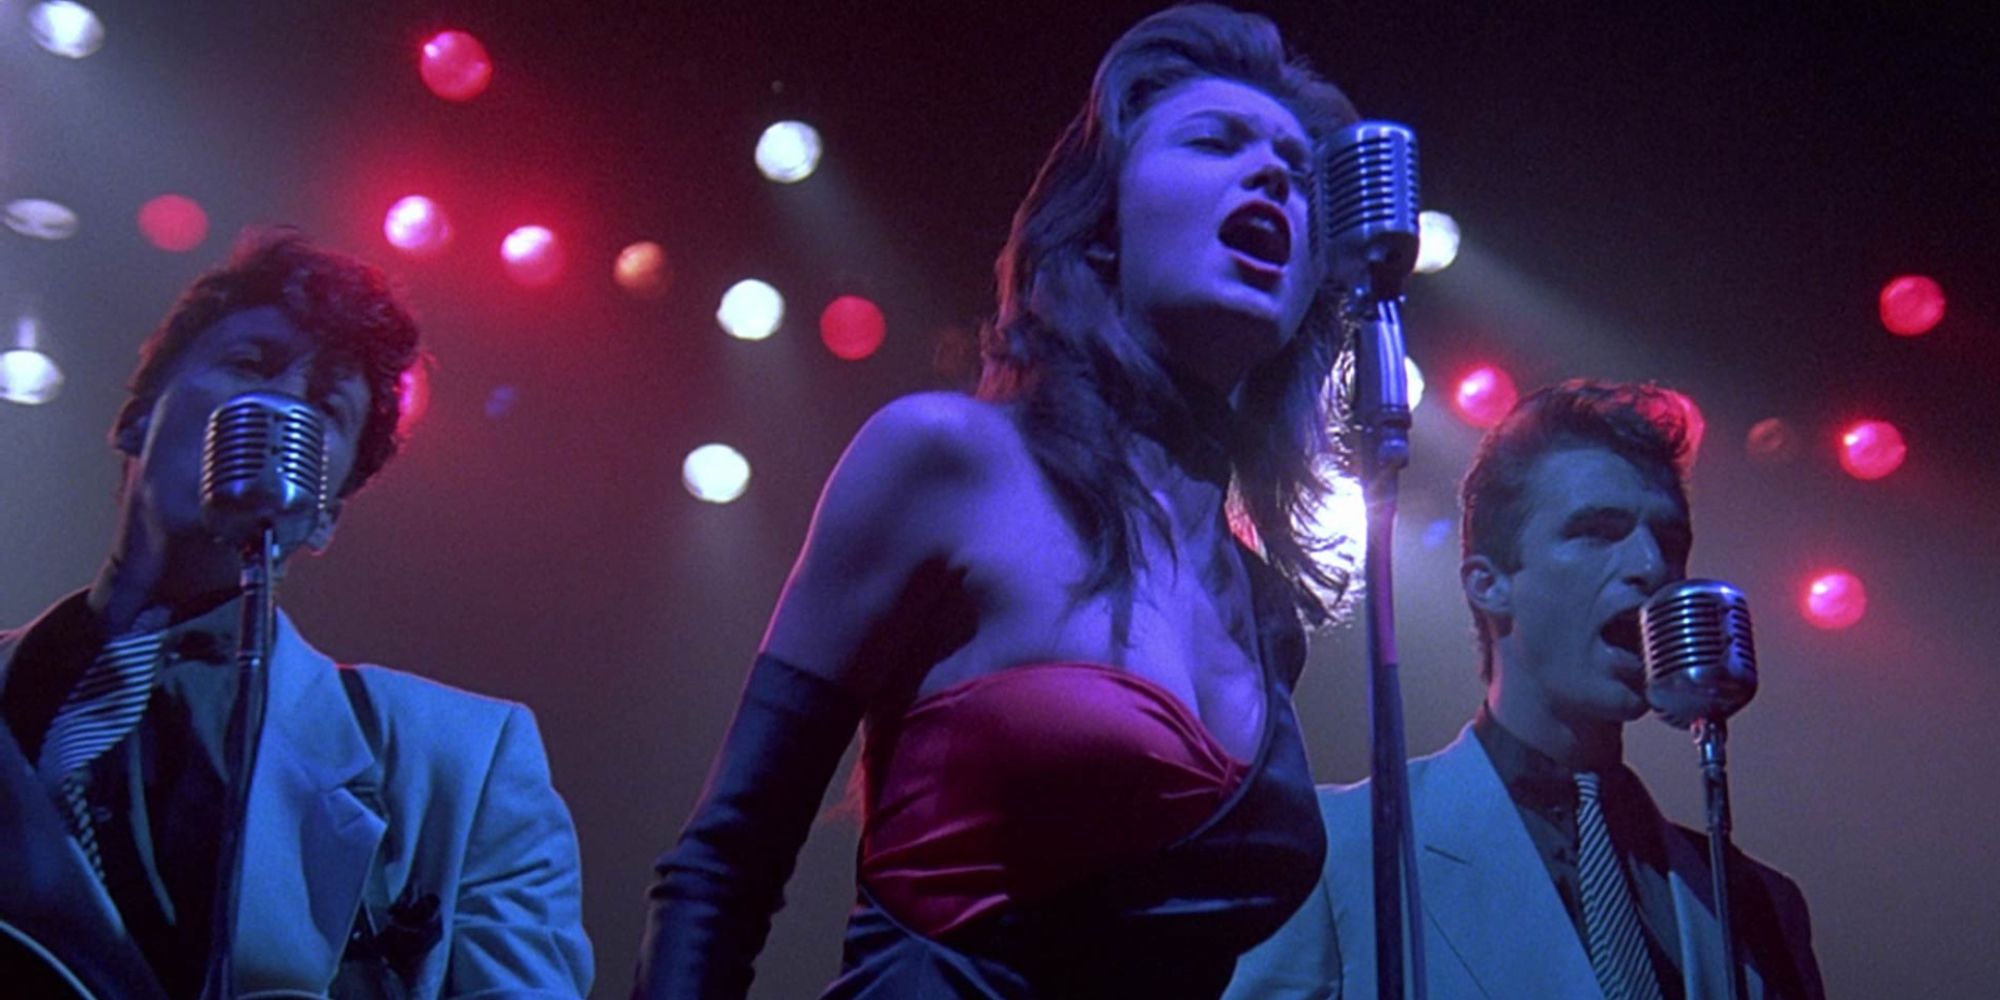 Two men and a woman singing on stage in the film Streets of Fire